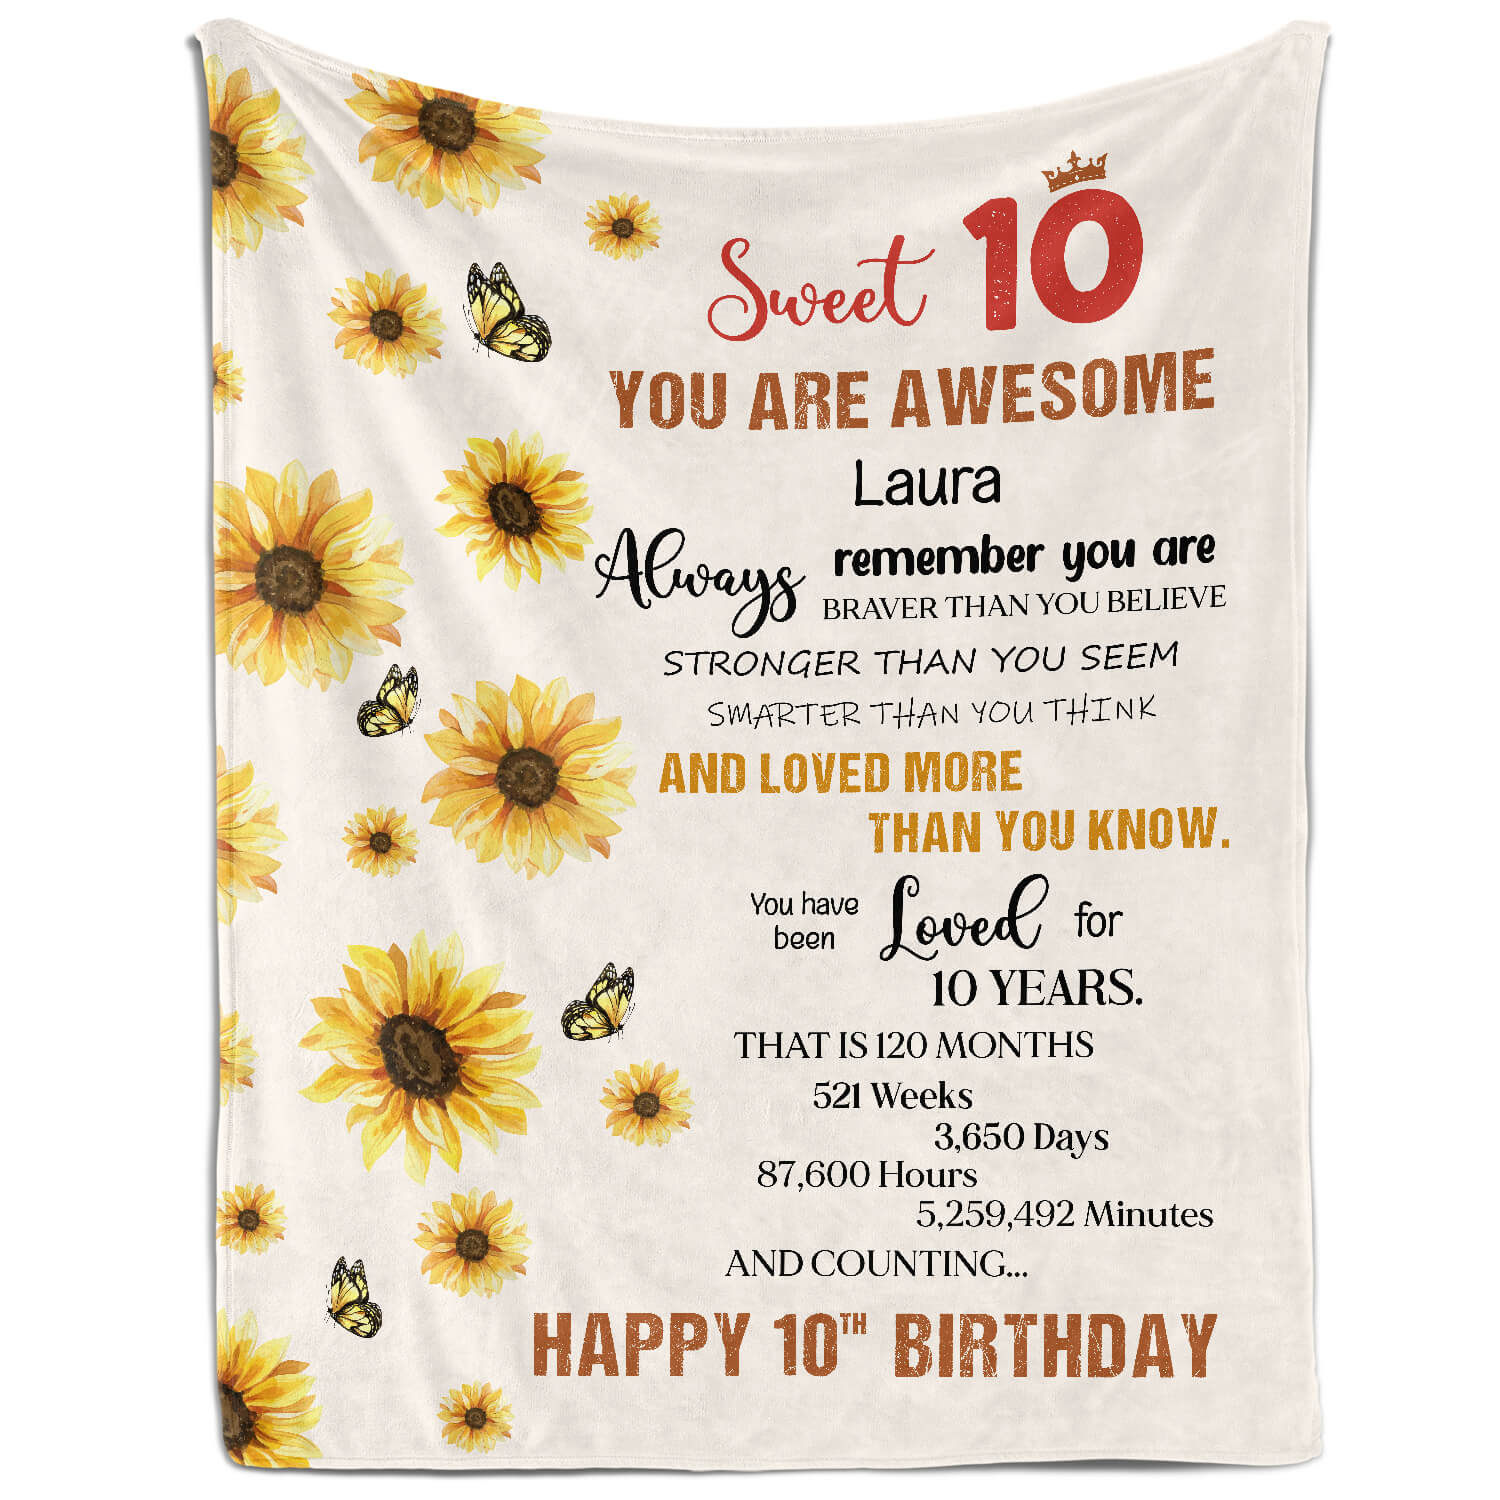 Sweet 10 - Personalized 10th Birthday gift For 10 Year Old Girl - Custom Blanket - MyMindfulGifts